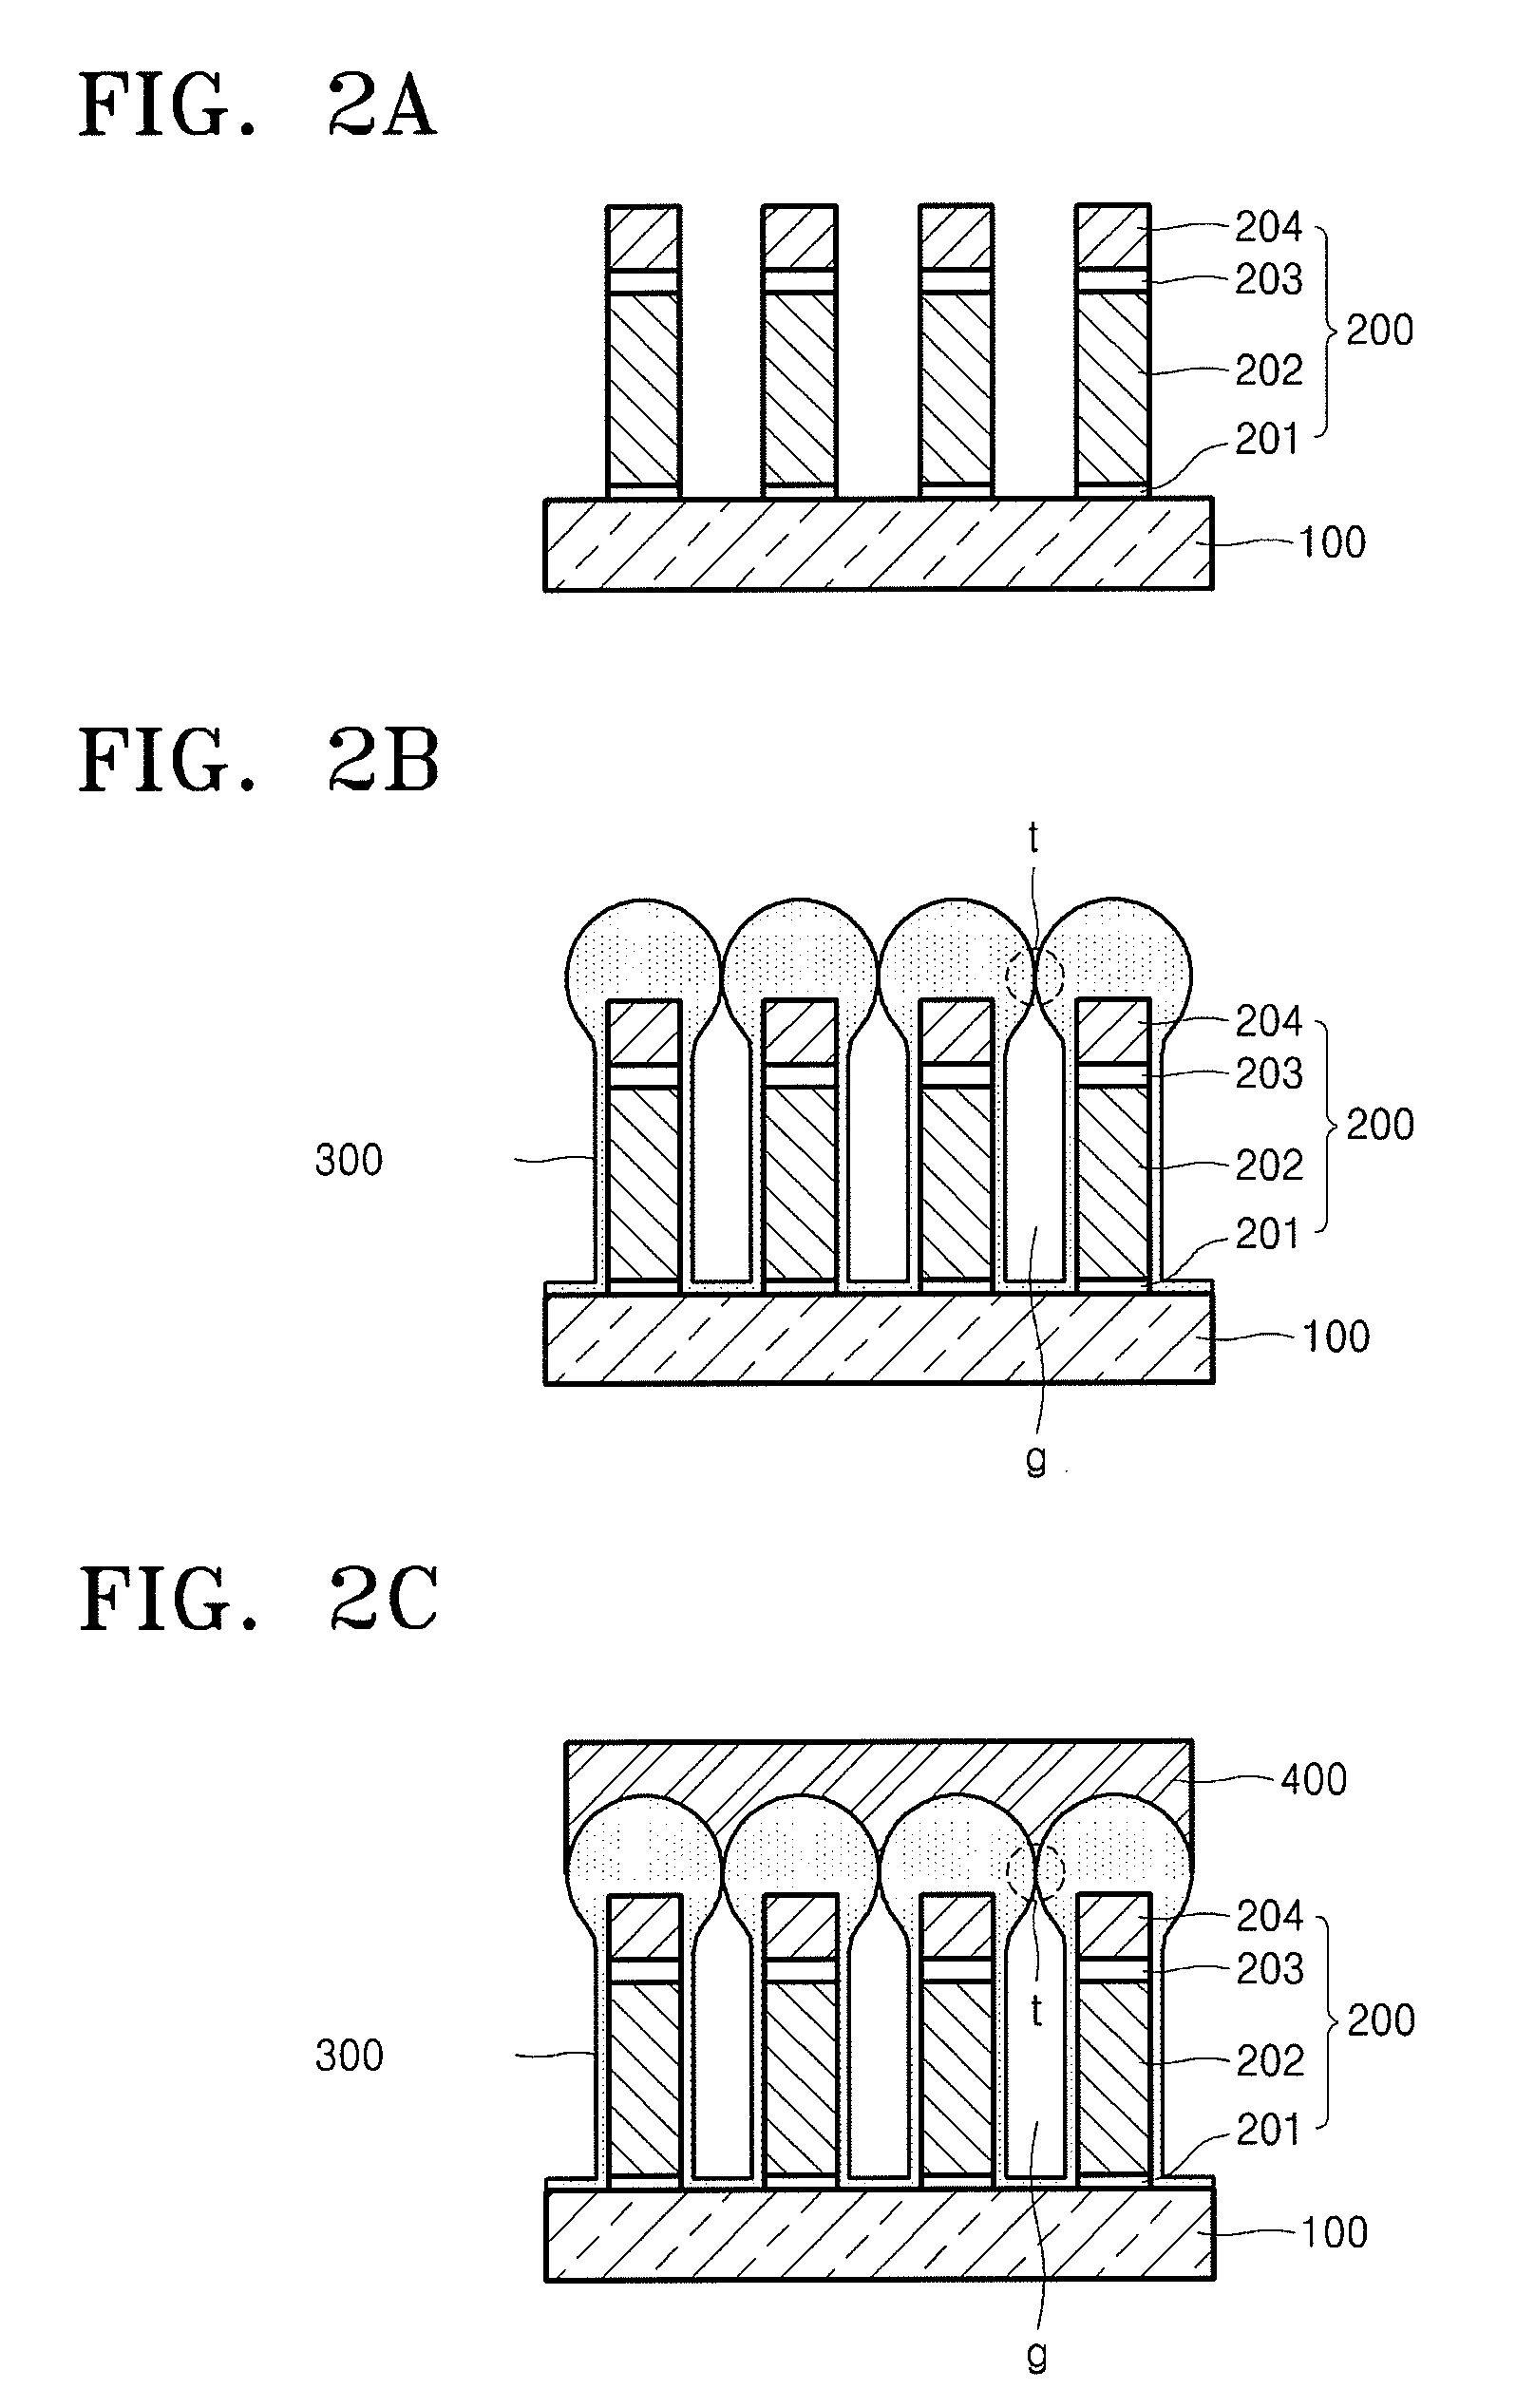 Method of fabricating a semiconductor device